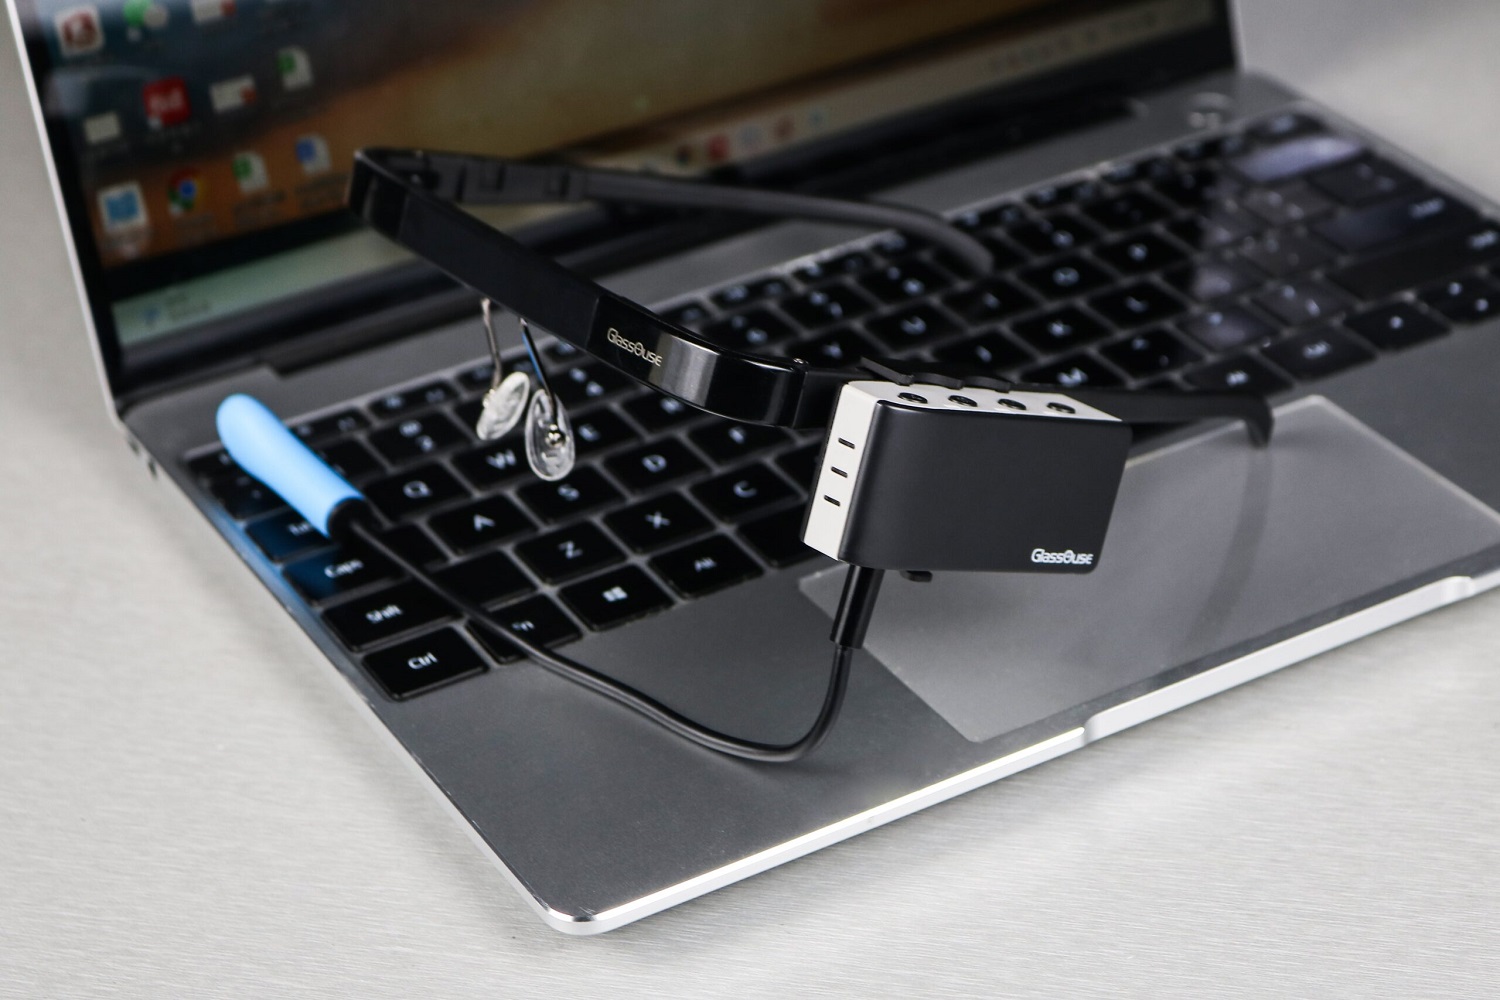 A GlassOuse headset sitting on a laptop.